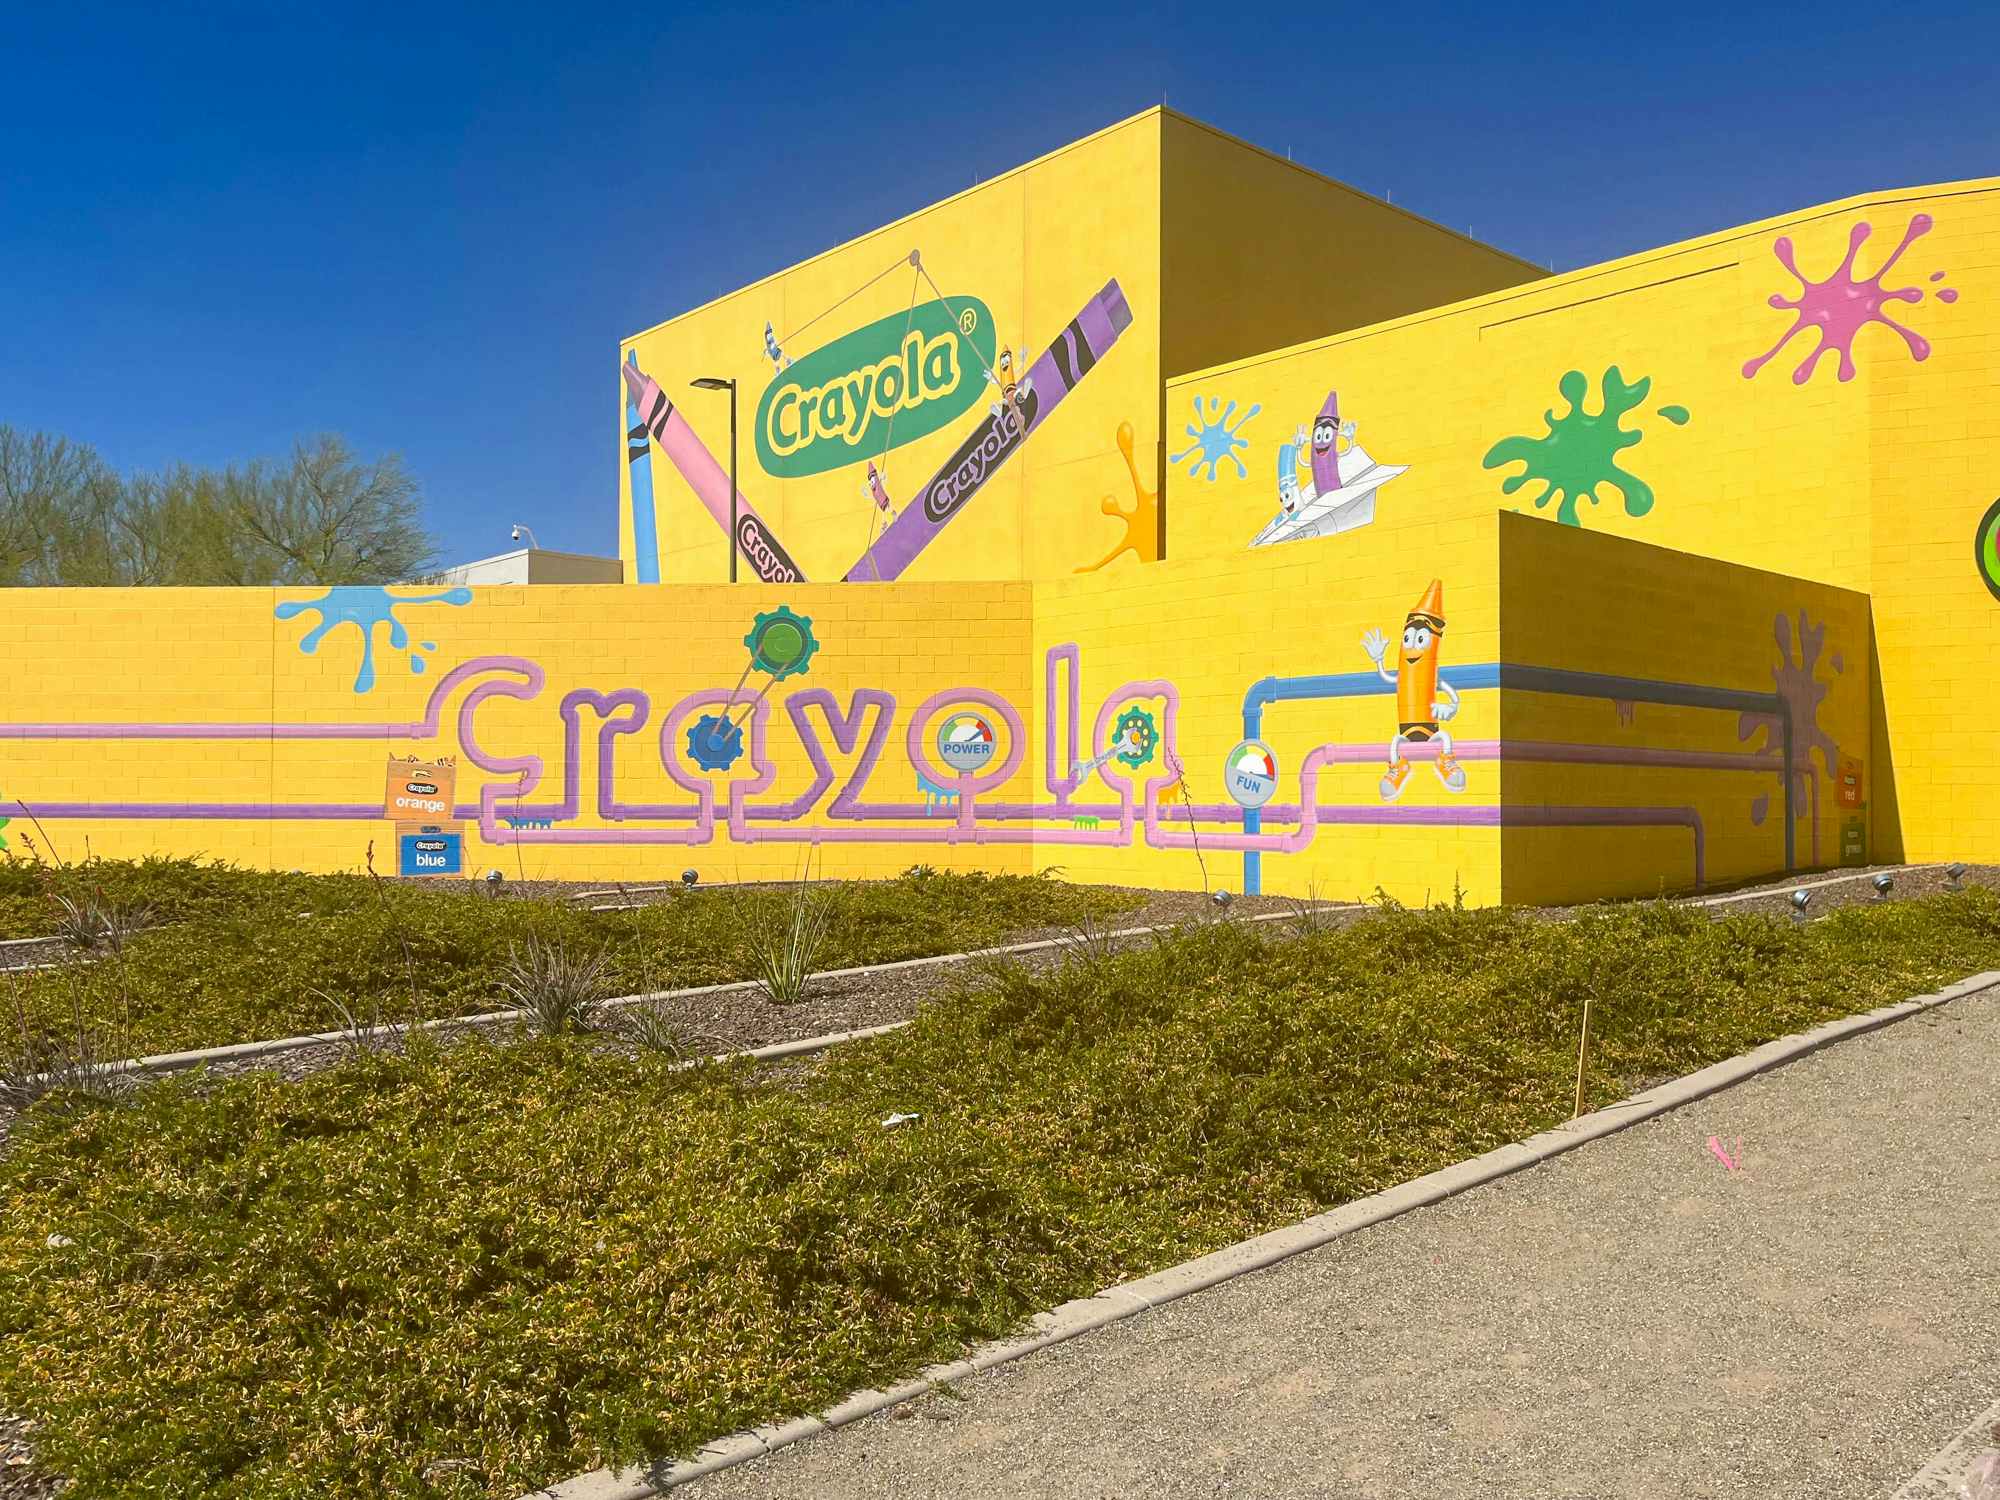 The Crayola Experience building